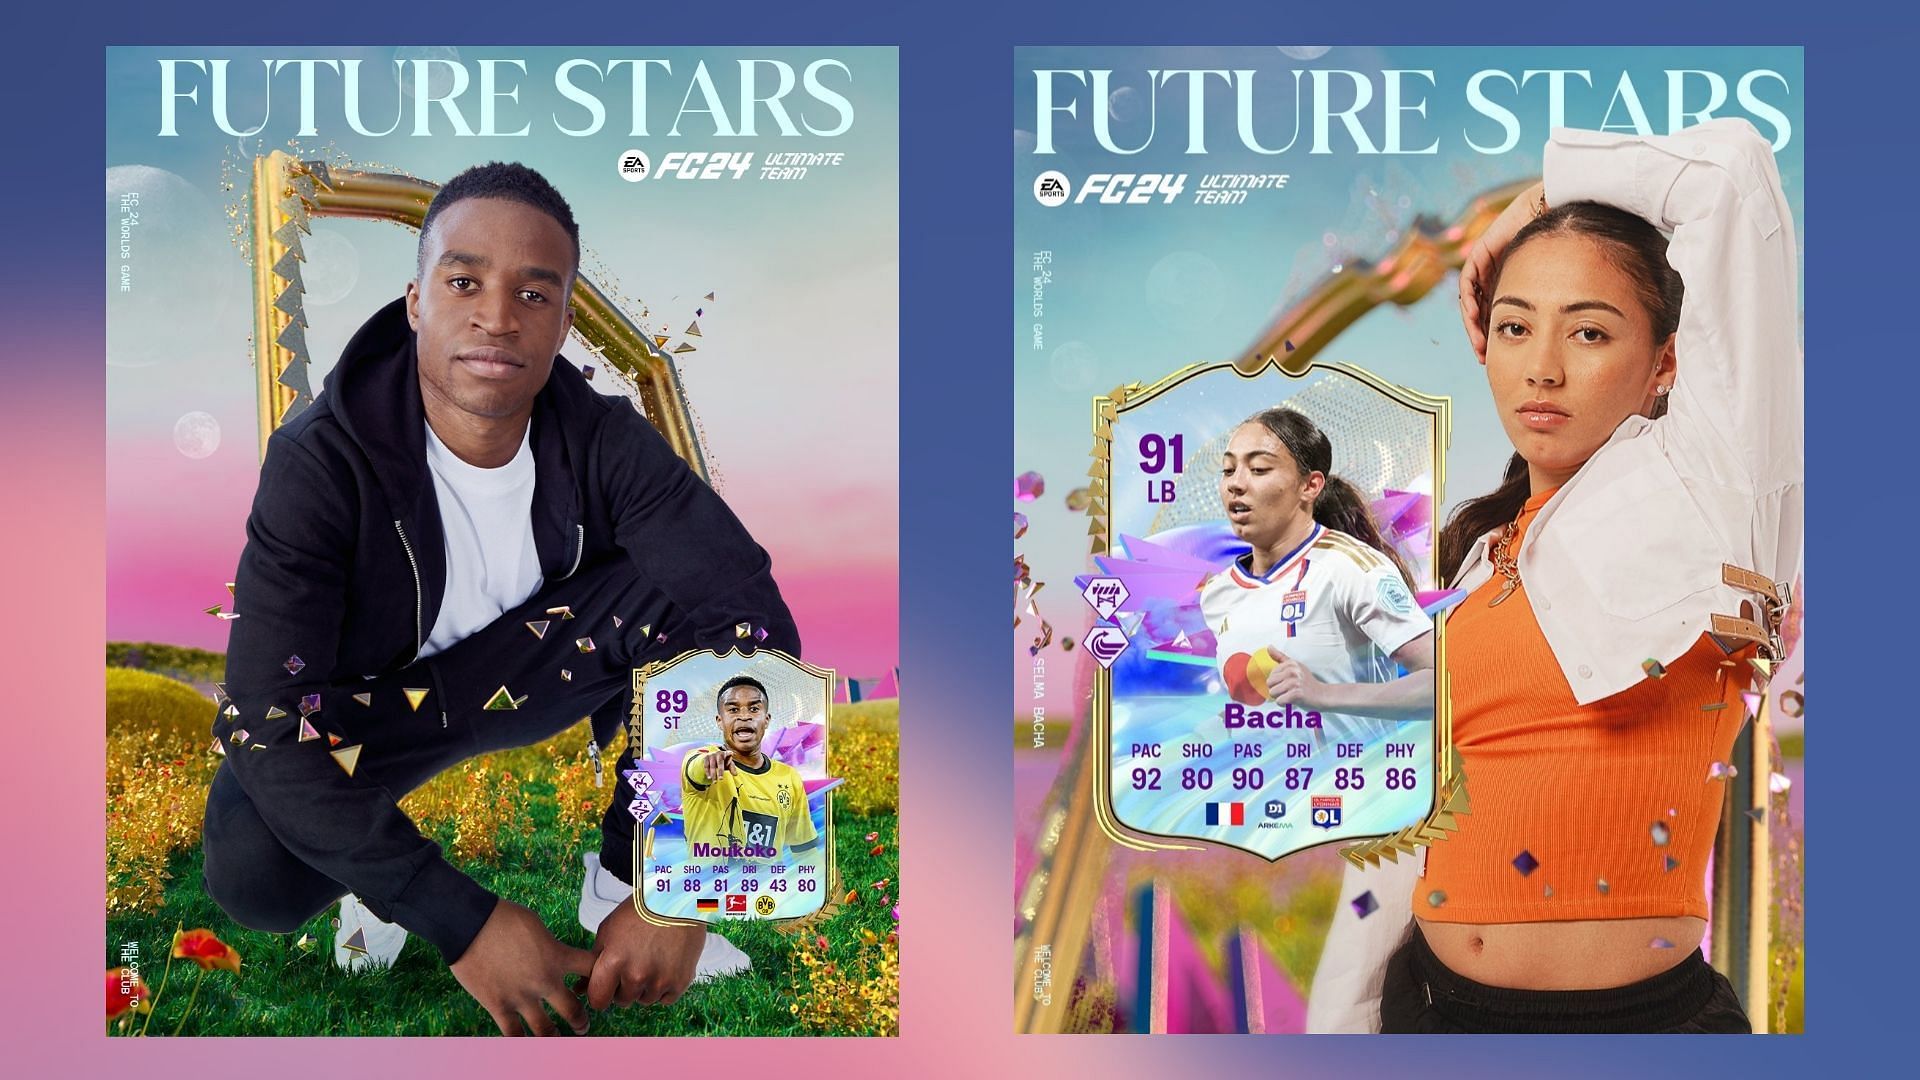 EA Sports handpicked some of the finest world football prodigies for their Future Stars roster(Images via EA Sports)